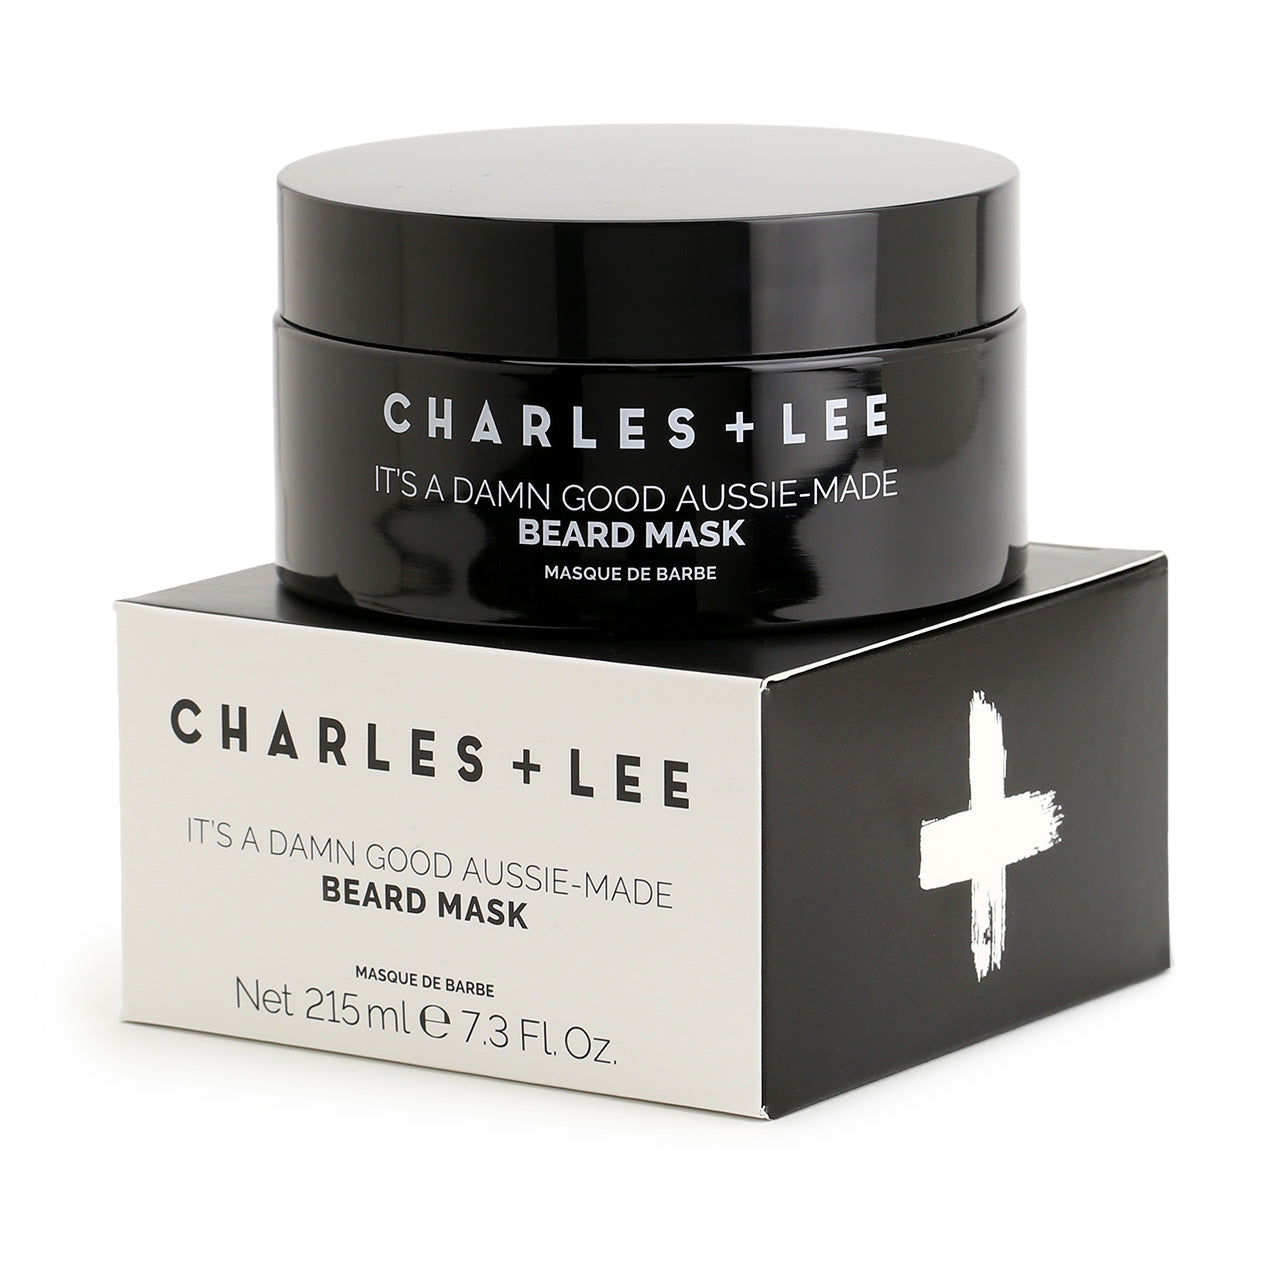 Beard Mask from Charles and Lee showing the black tub sitting on the black and white box